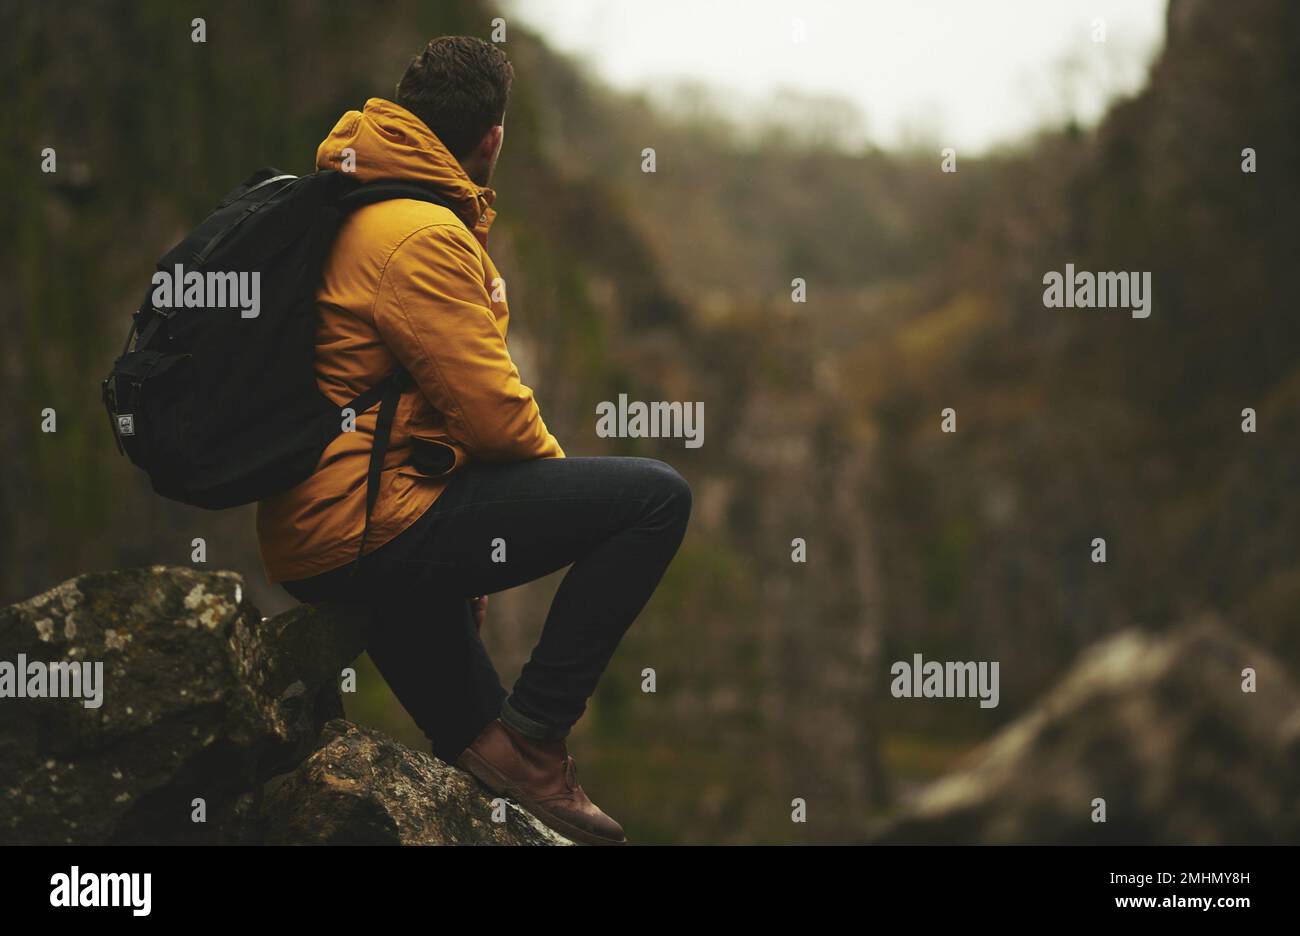 Hiker with backpack sitting on top of the rock mountain looking at the amazing environment. Hiker with a yellow jacket seated on a mountain edge. Stock Photo